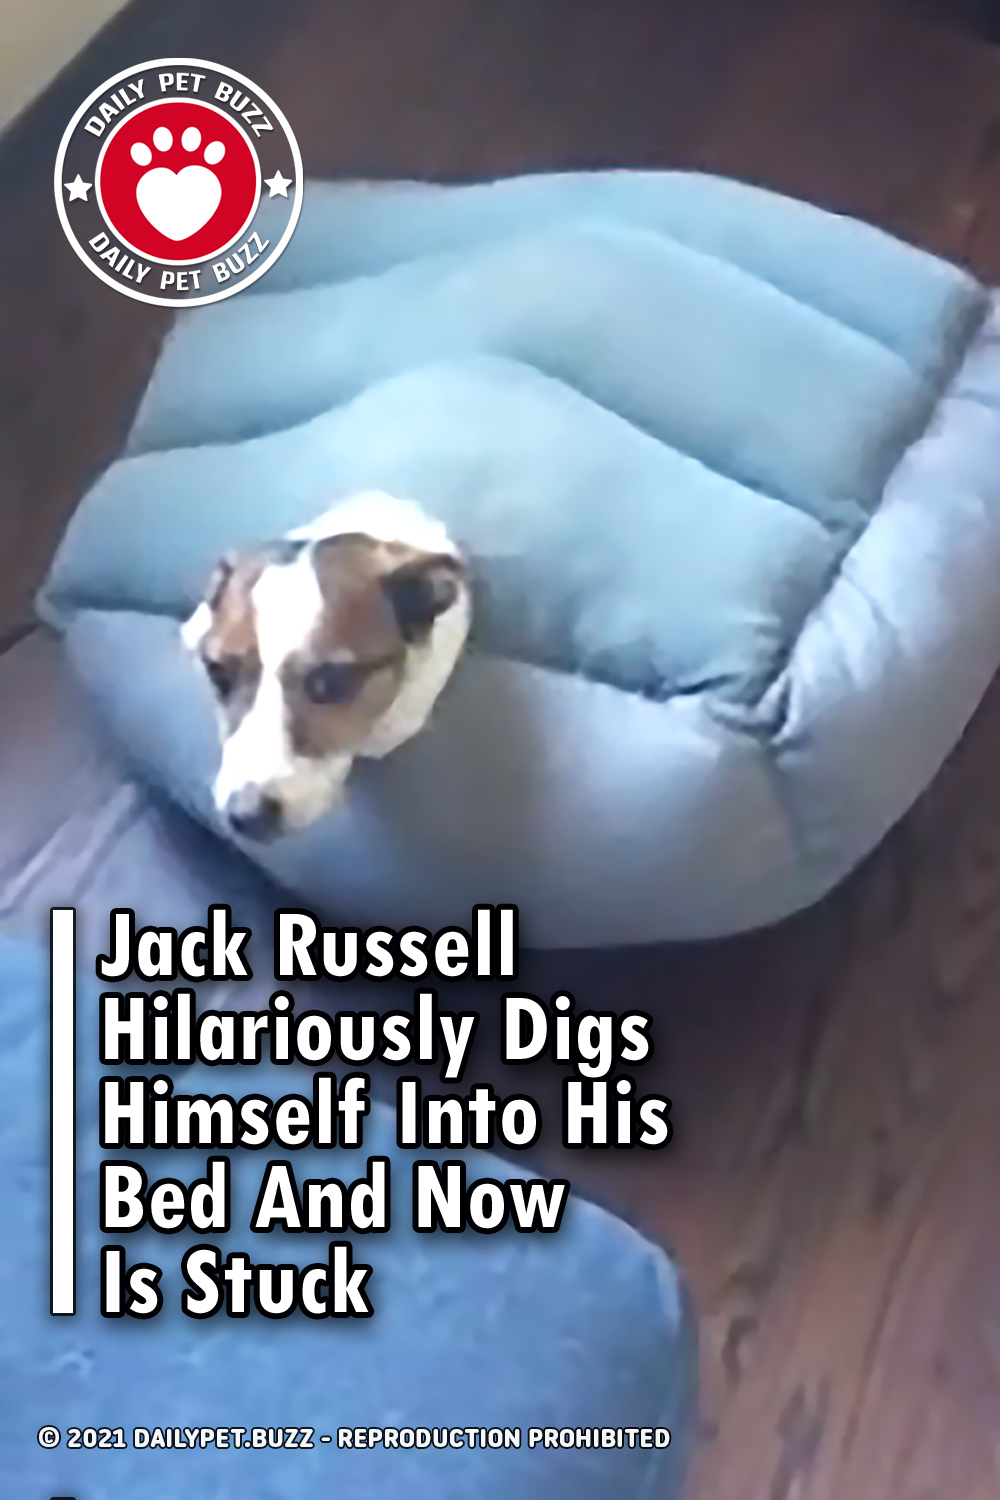 Jack Russell Hilariously Digs Himself Into His Bed And Now Is Stuck